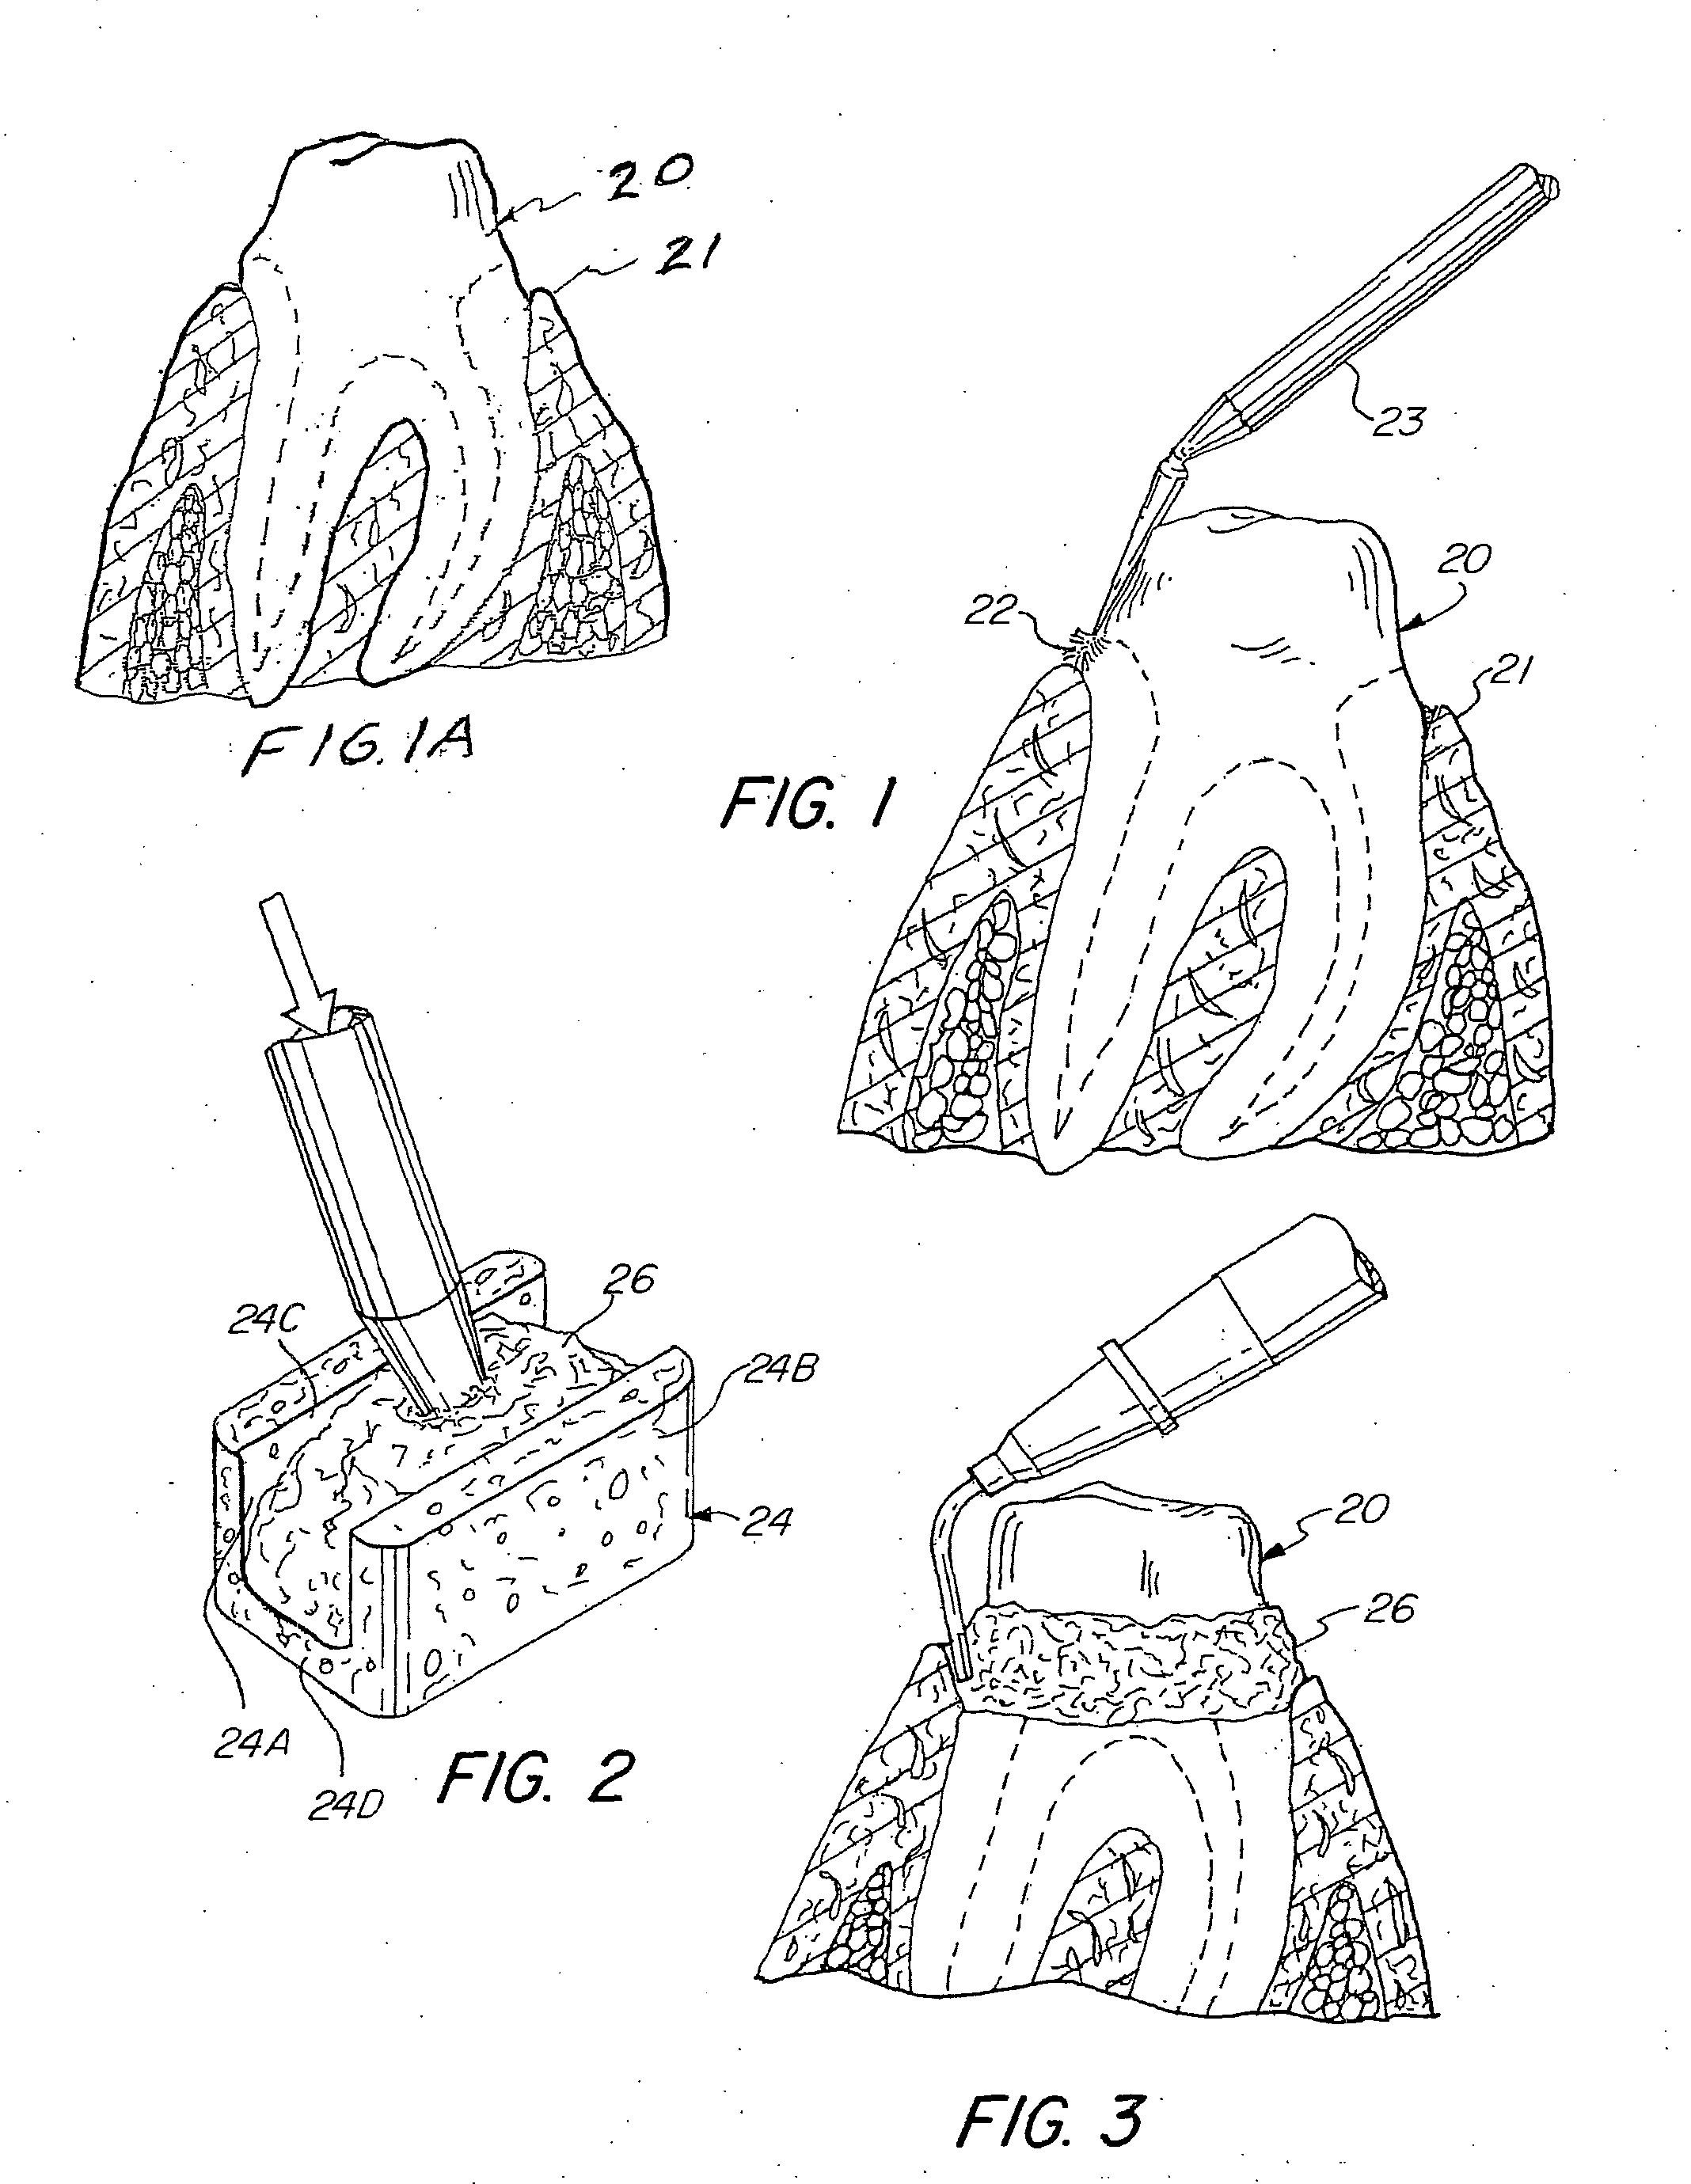 Preloaded dental cap and retraction material for gingival tissue retraction